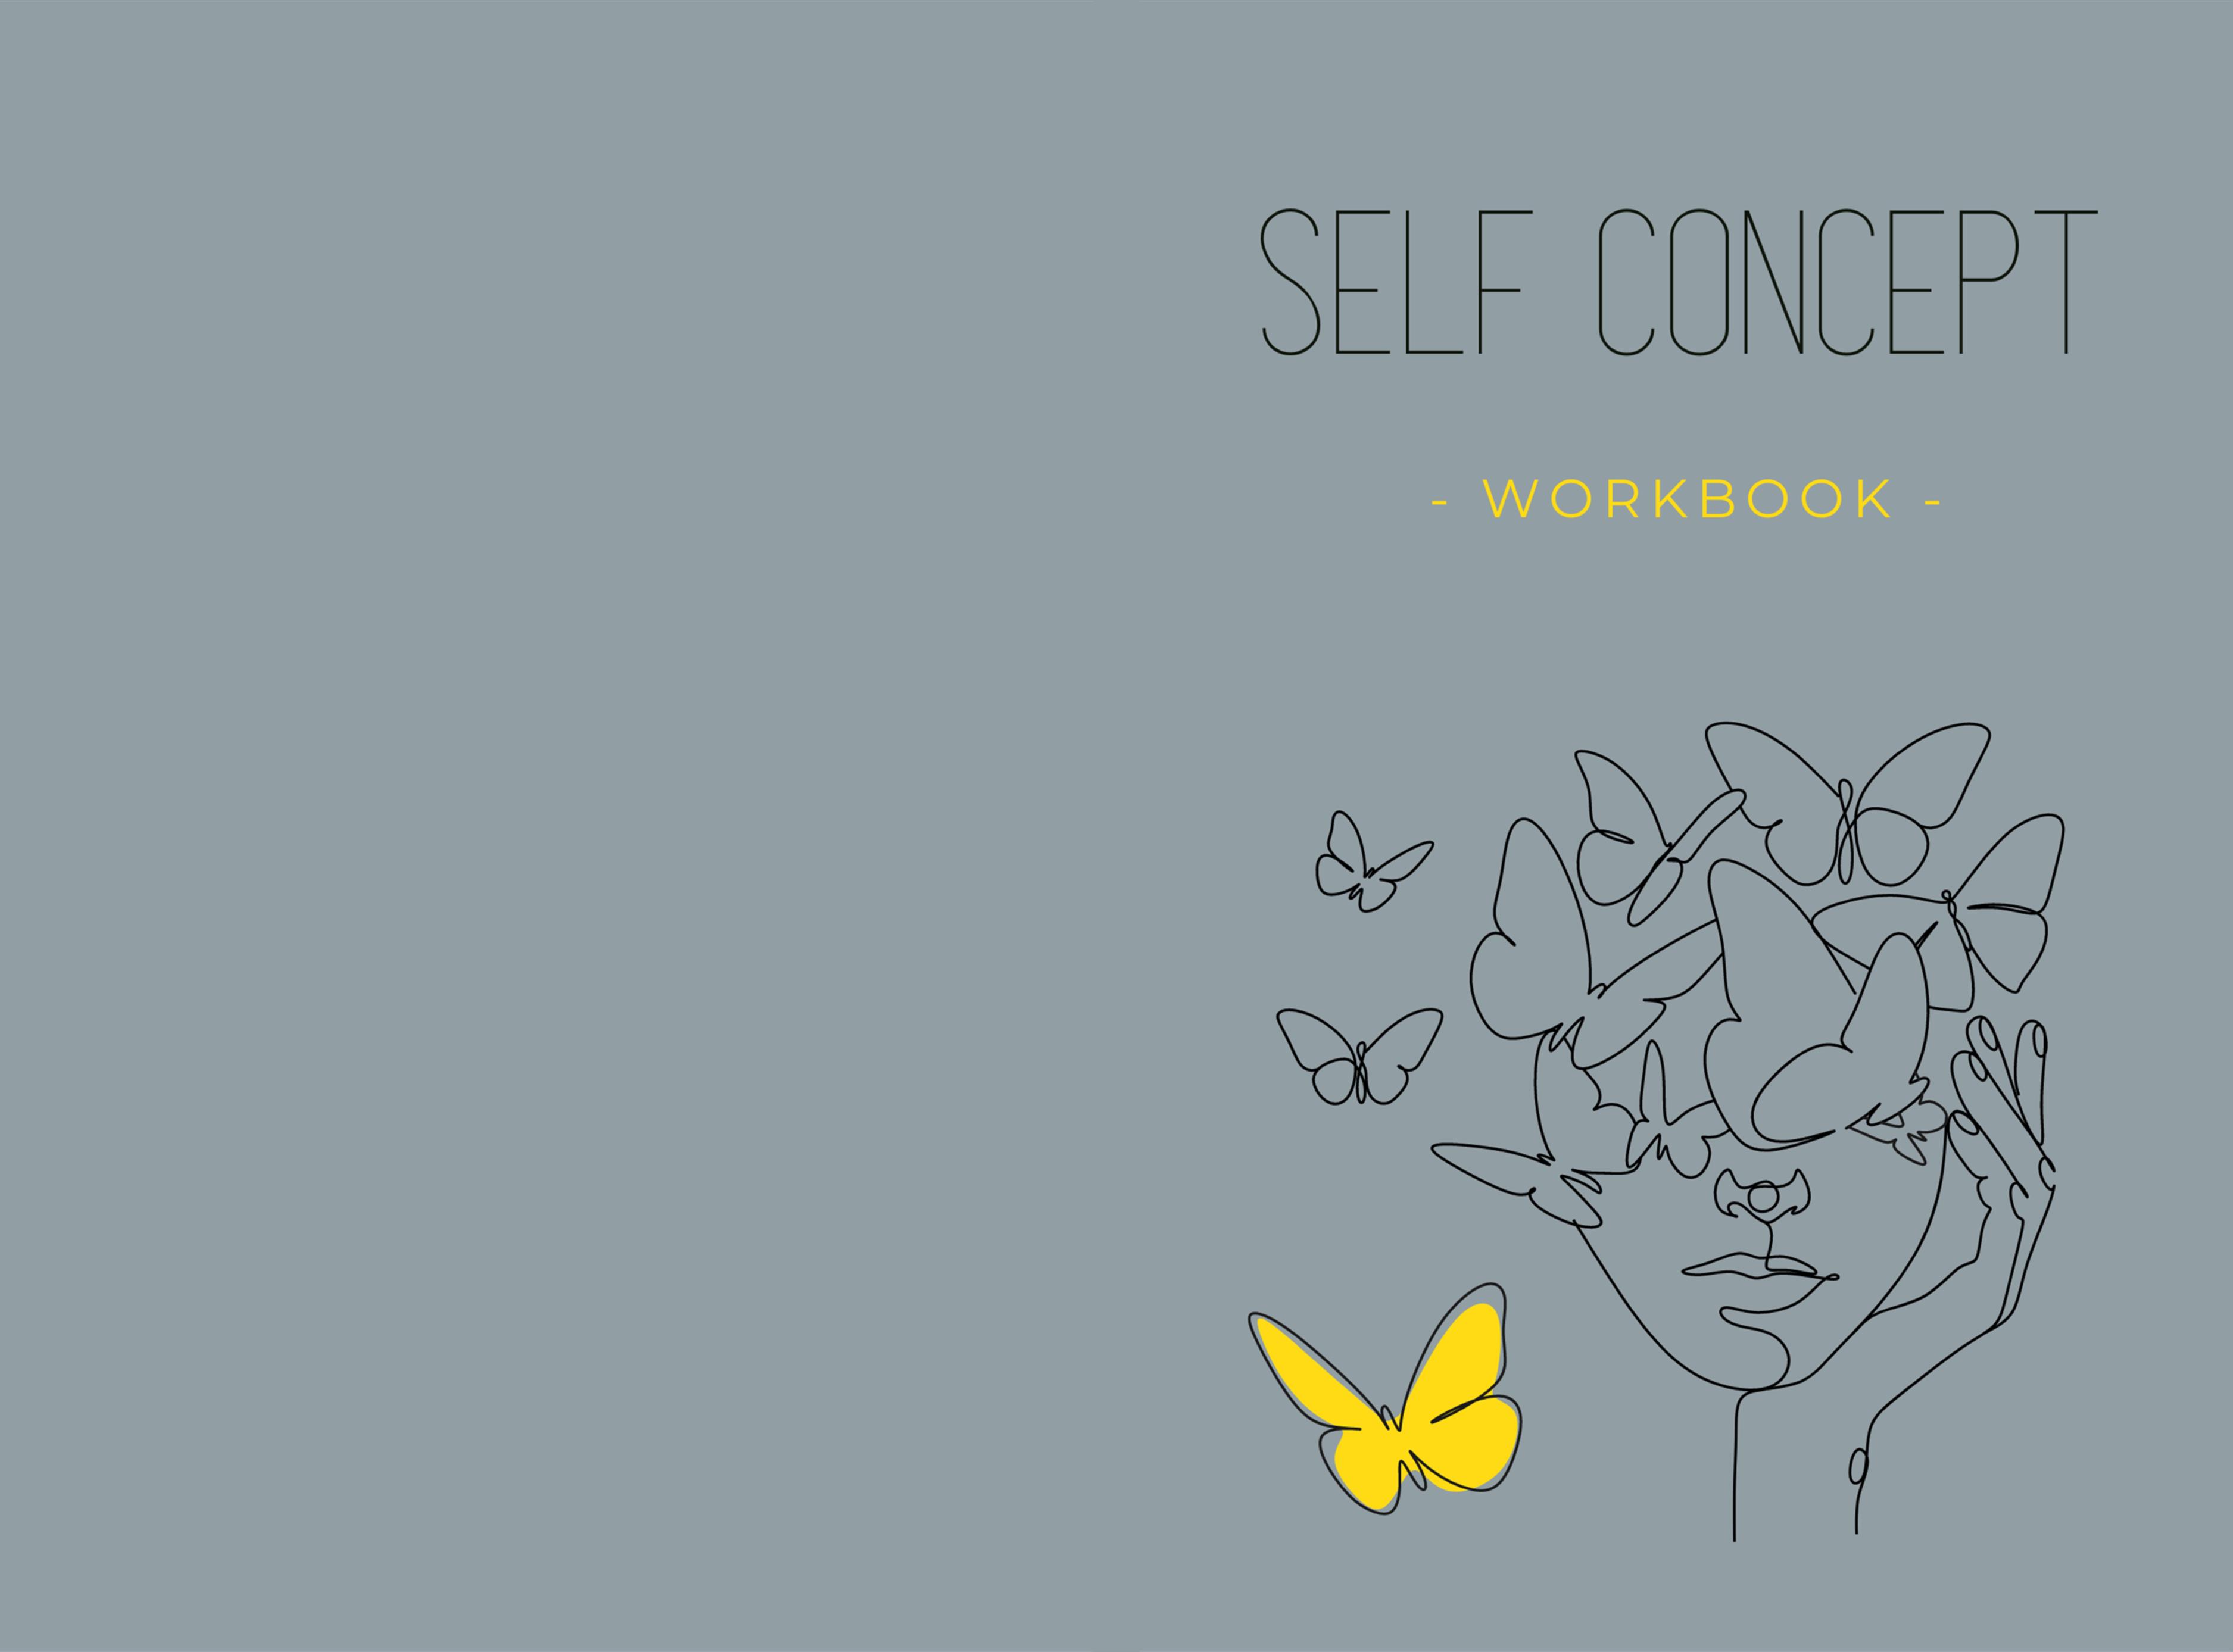 Self Concept Workbook cover image